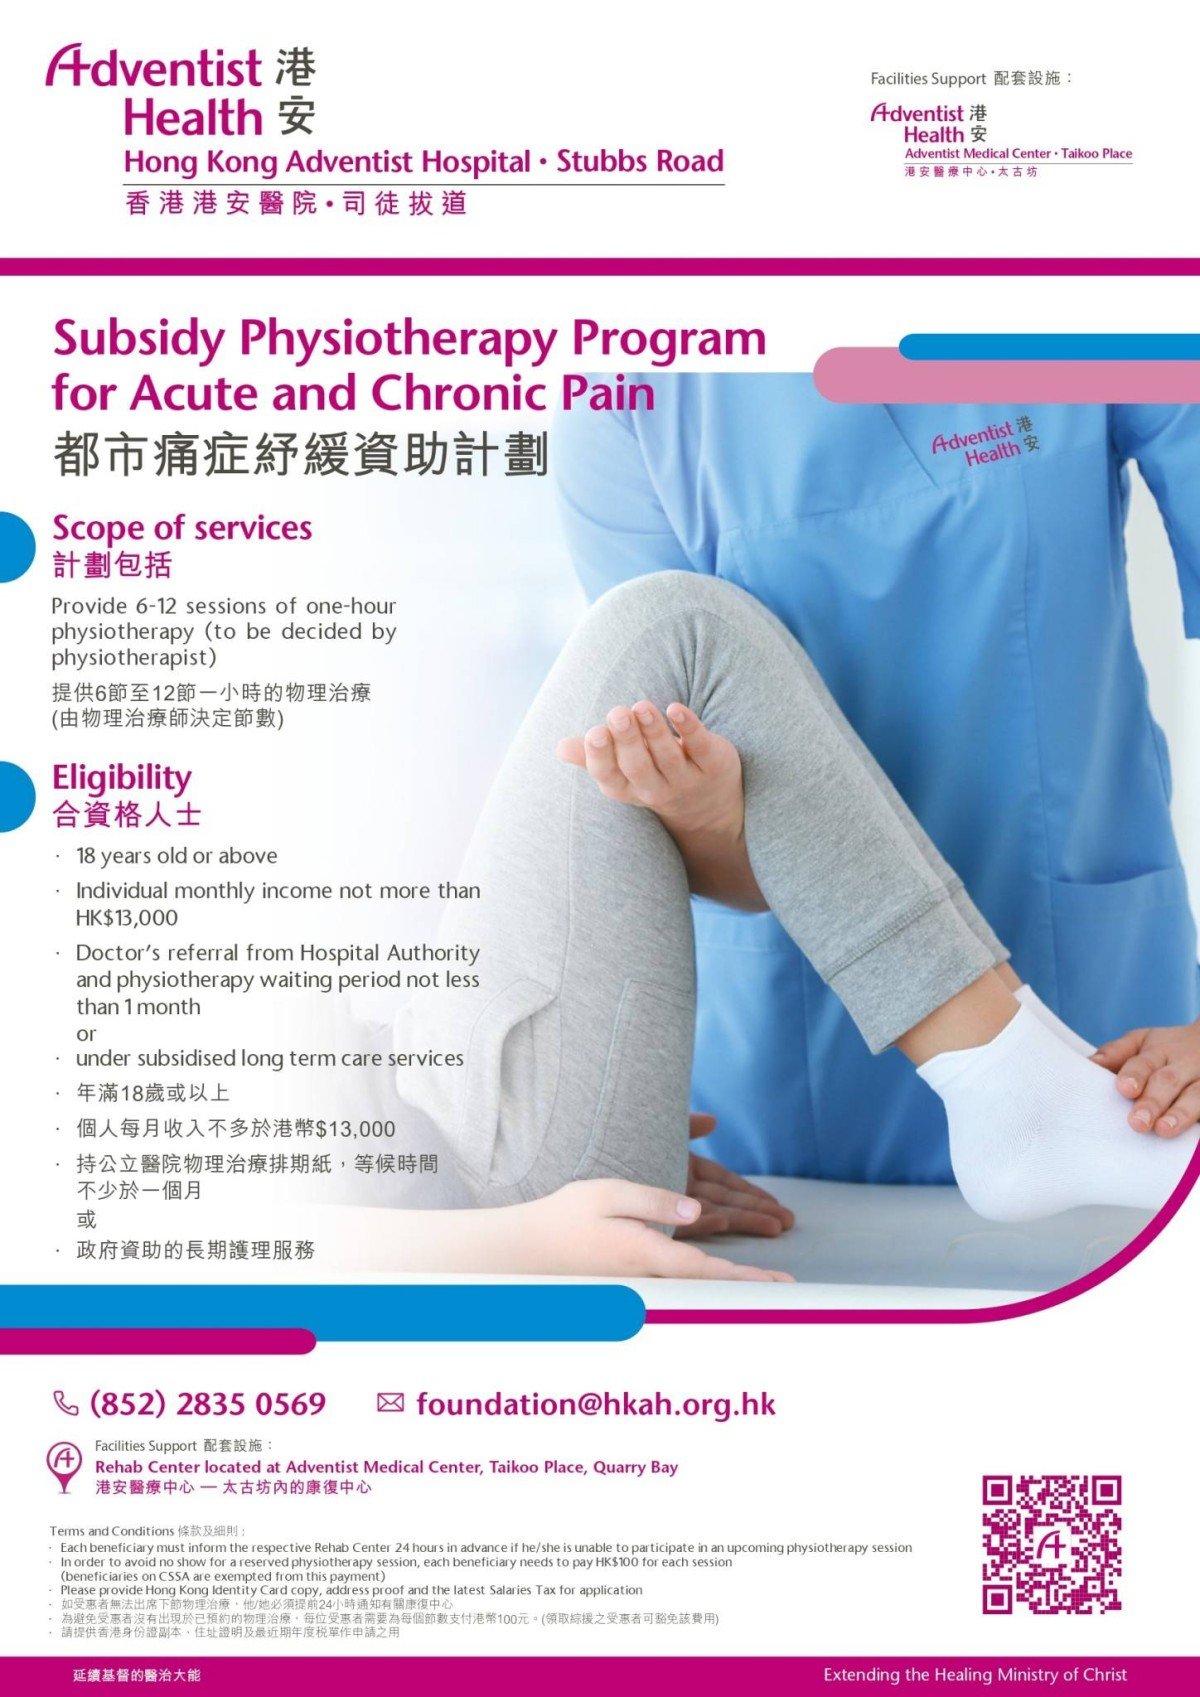 Subsidy Physiotherapy Program for Acute and Chronic Pain